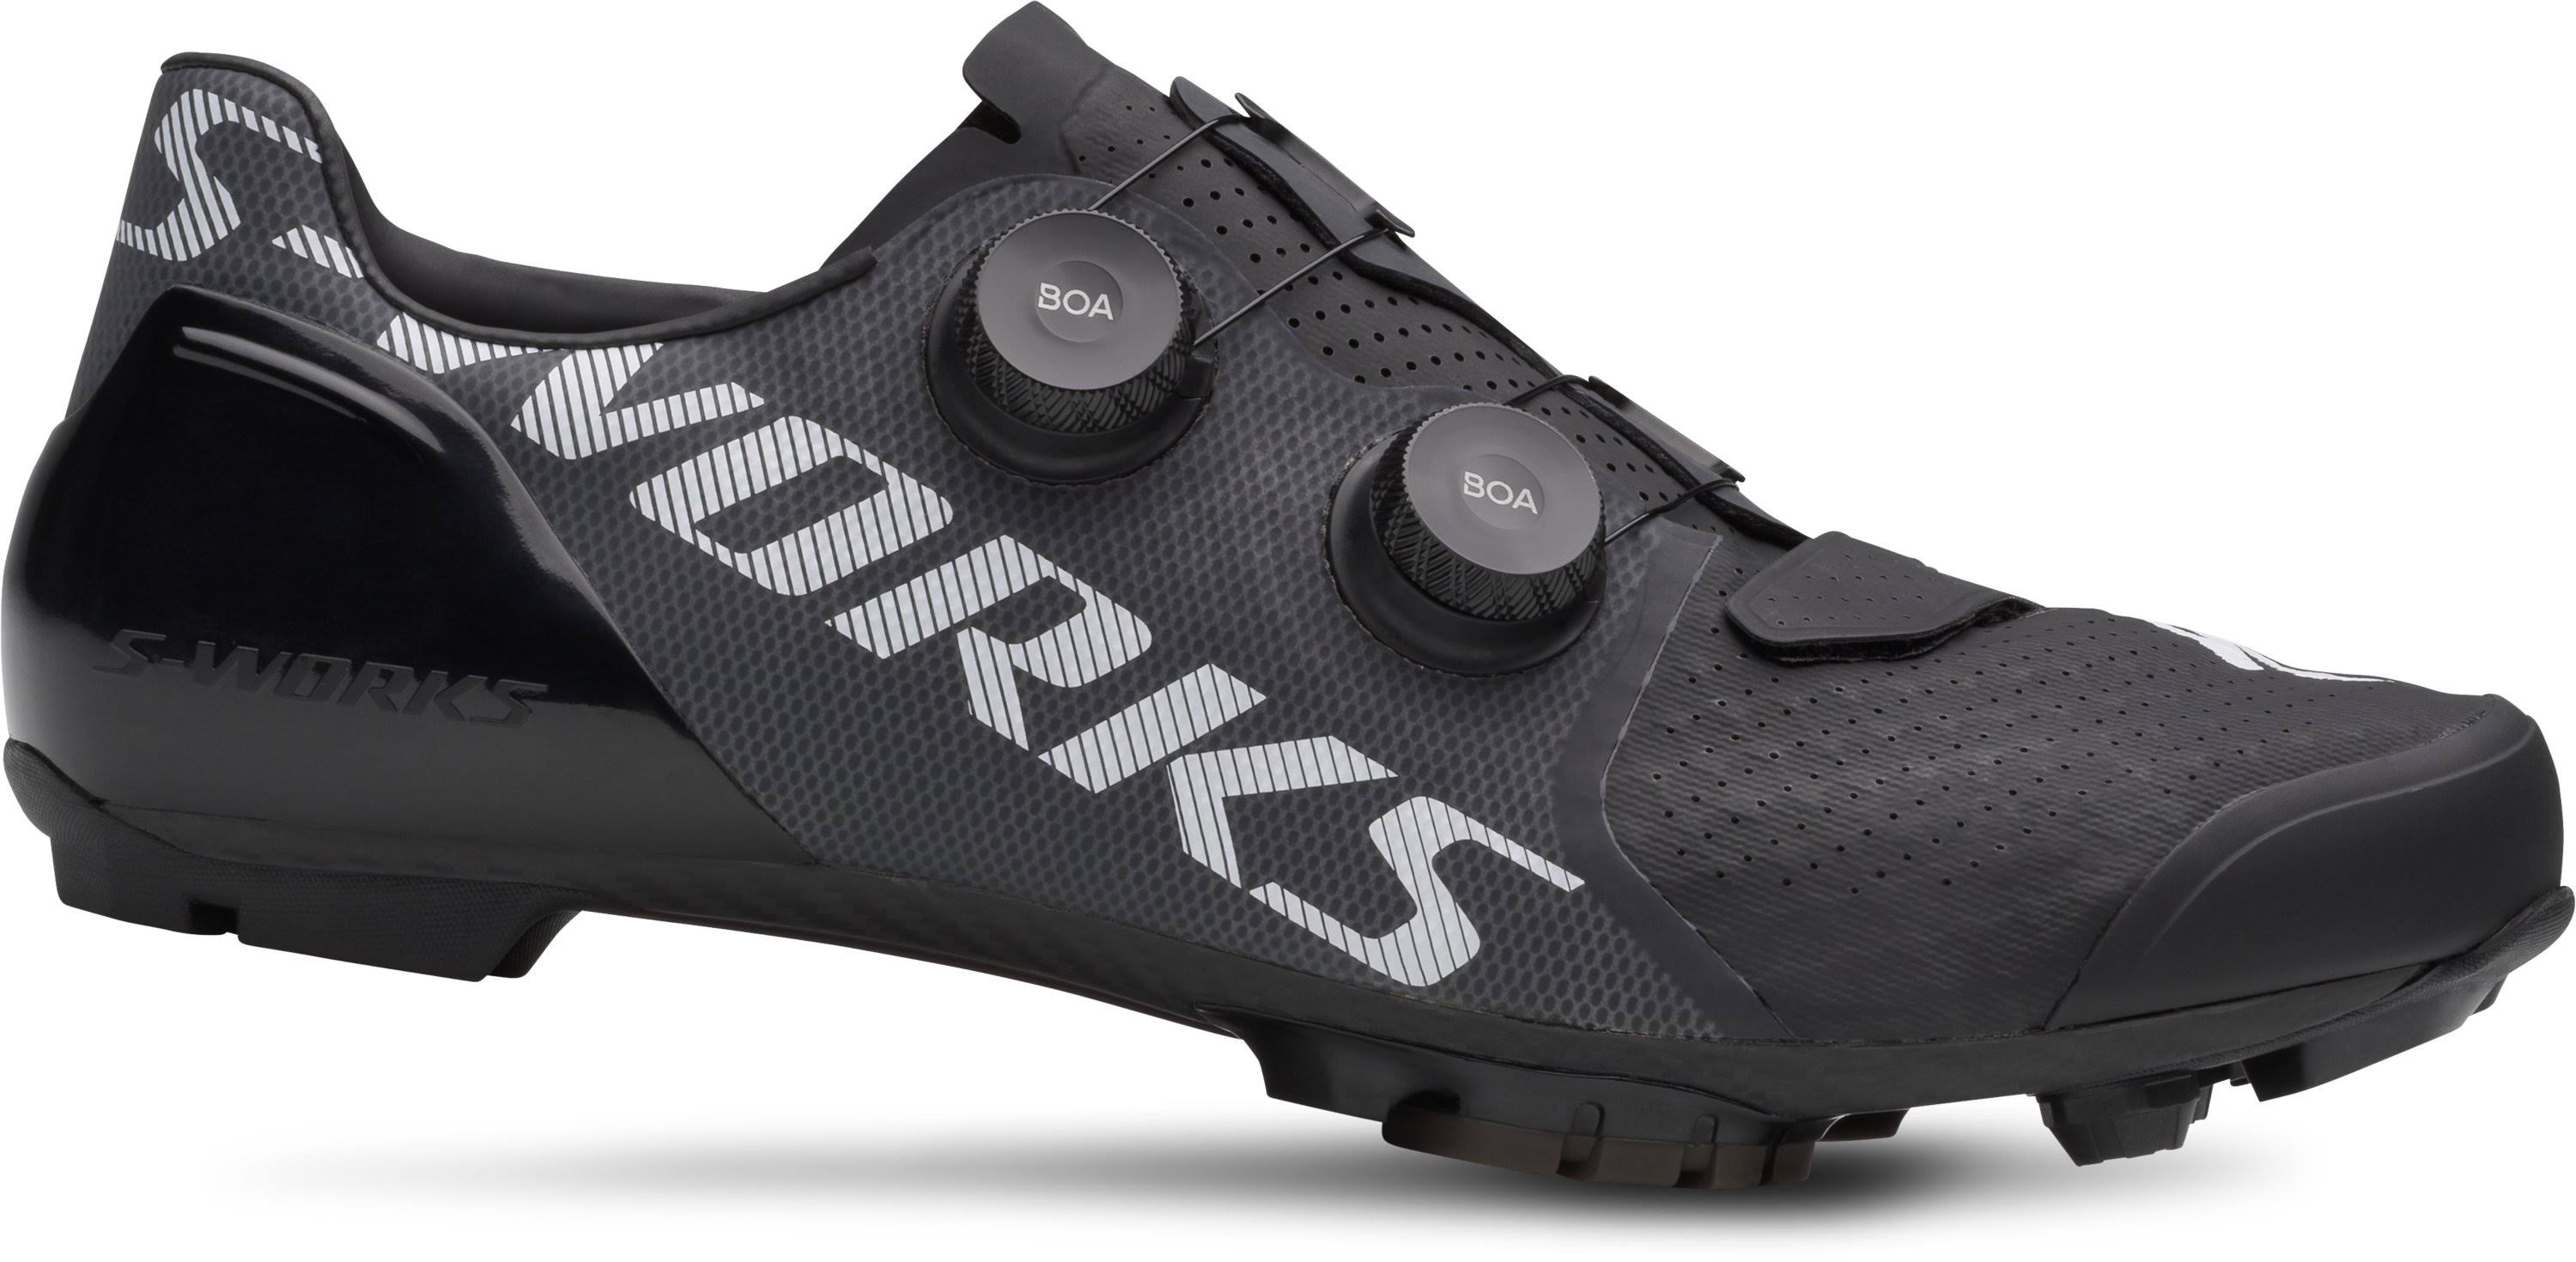 Specialized S-Works Recon Shoes - Black